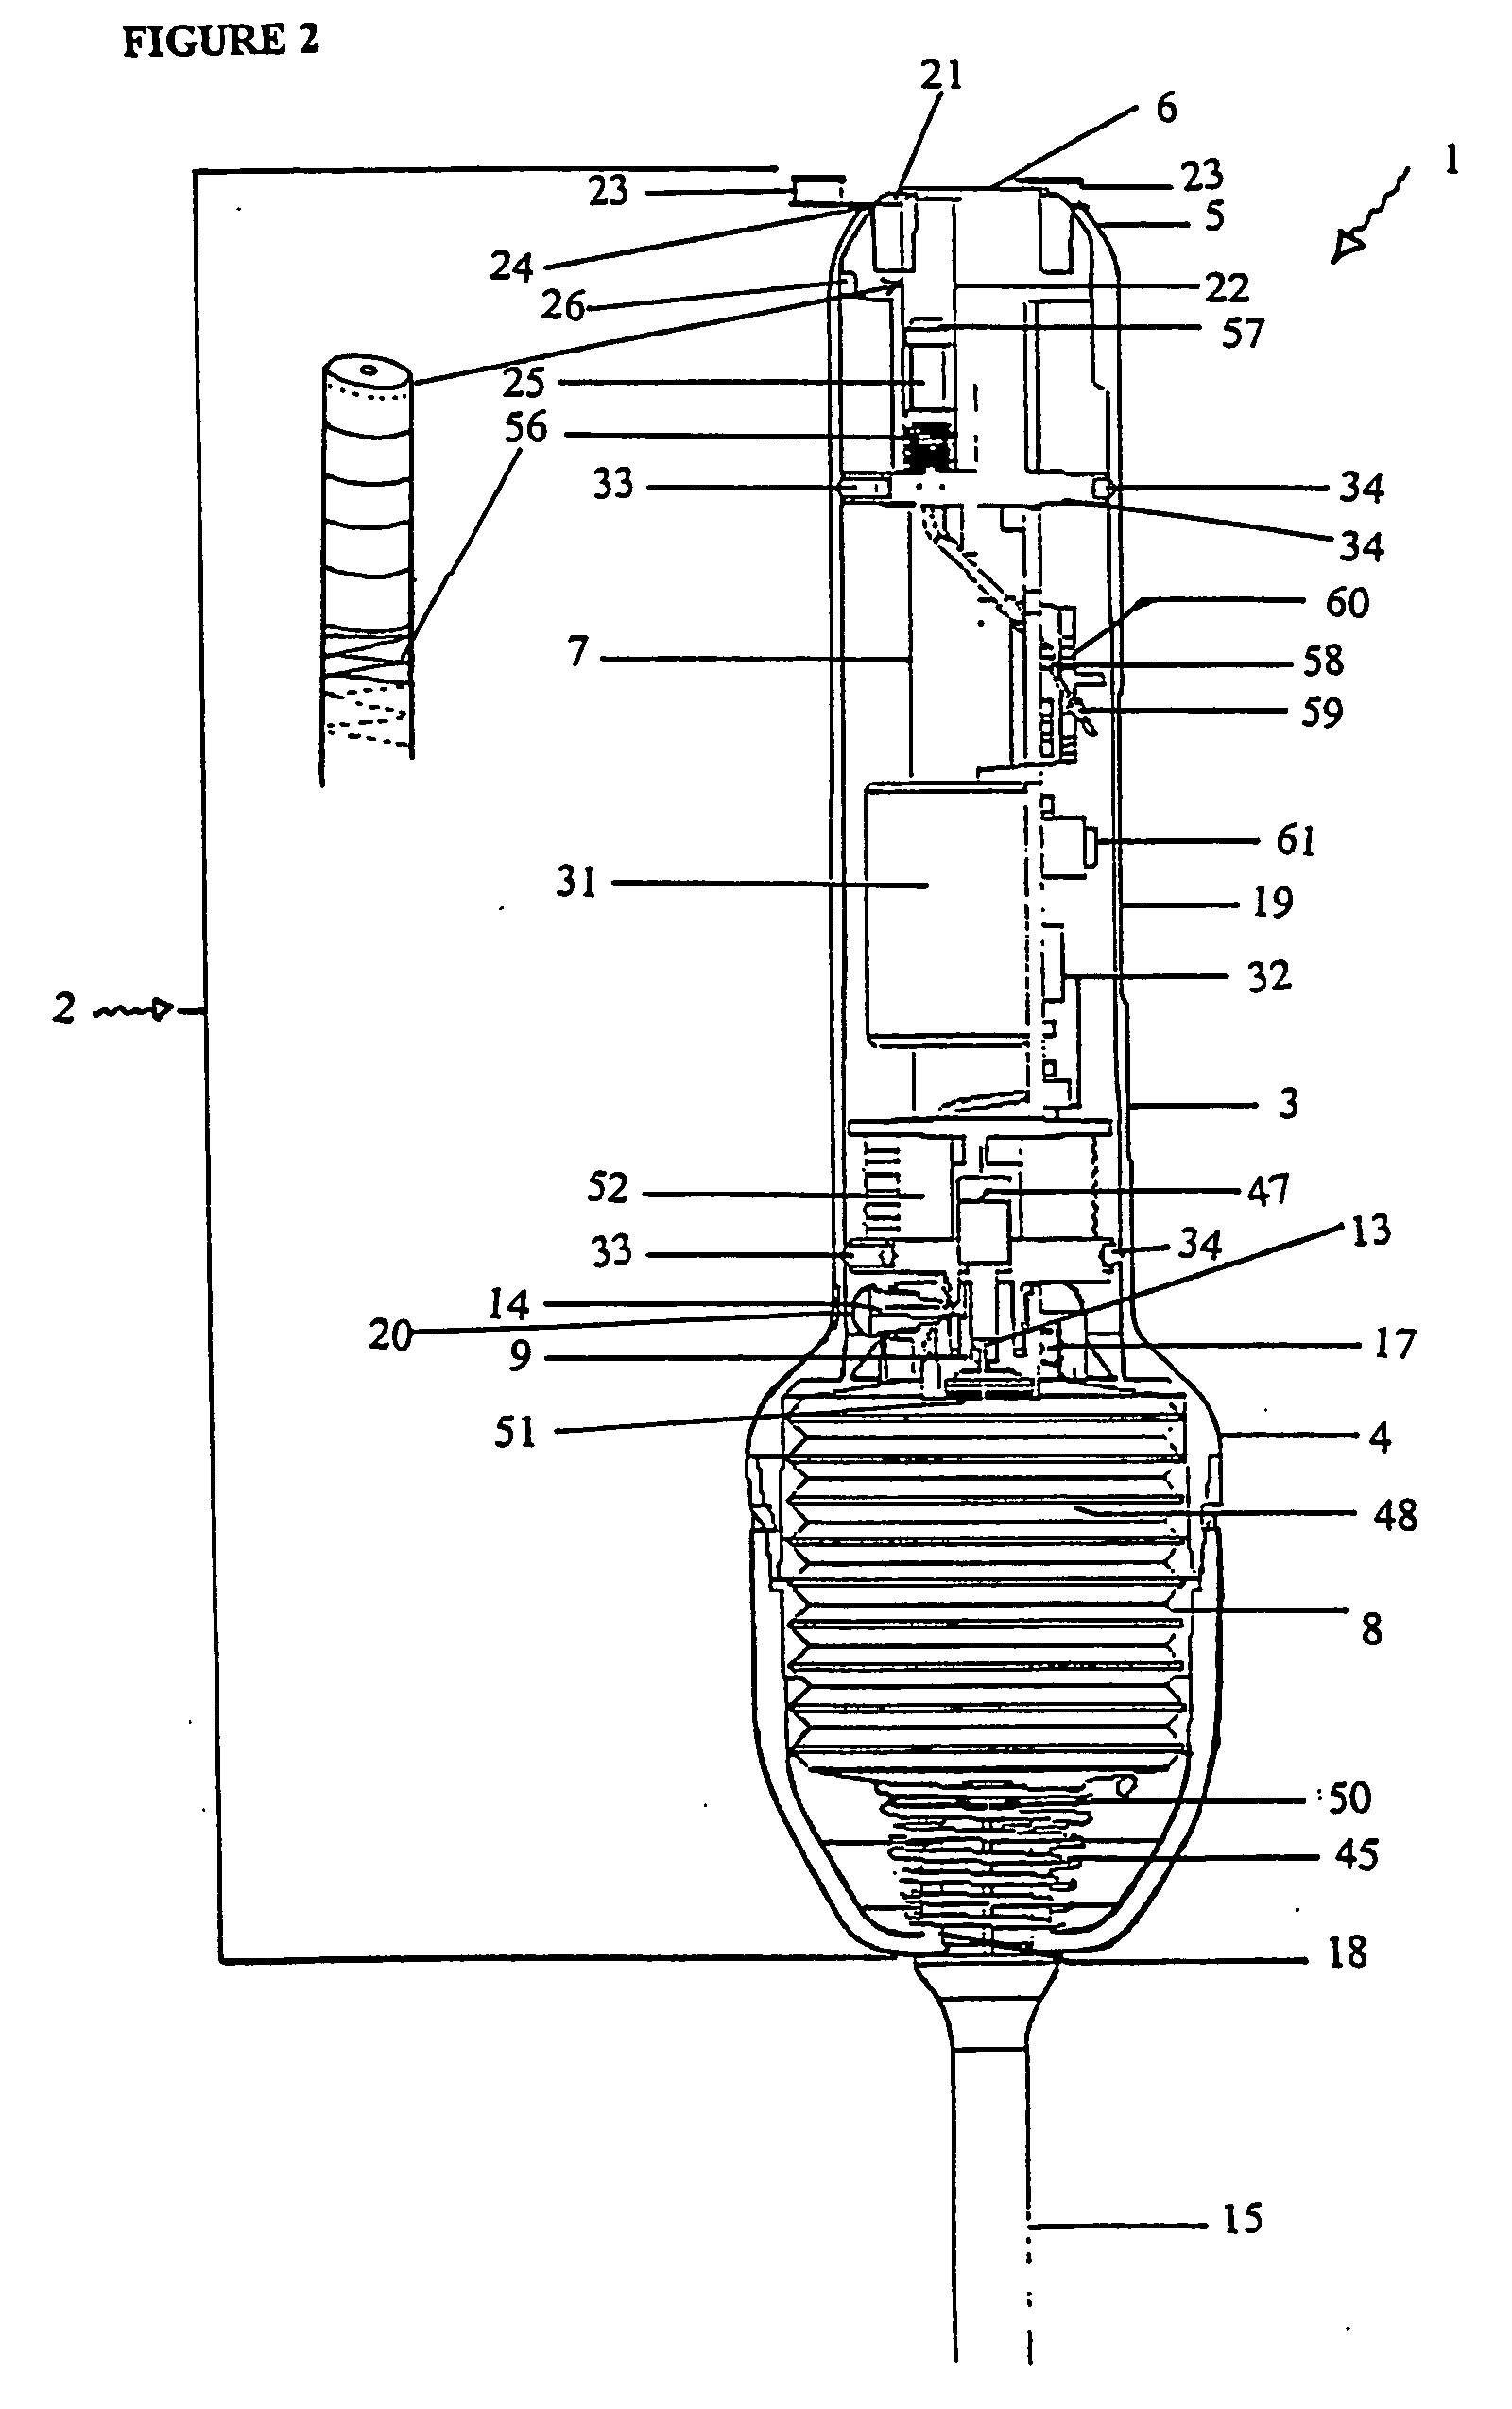 Substance delivery device